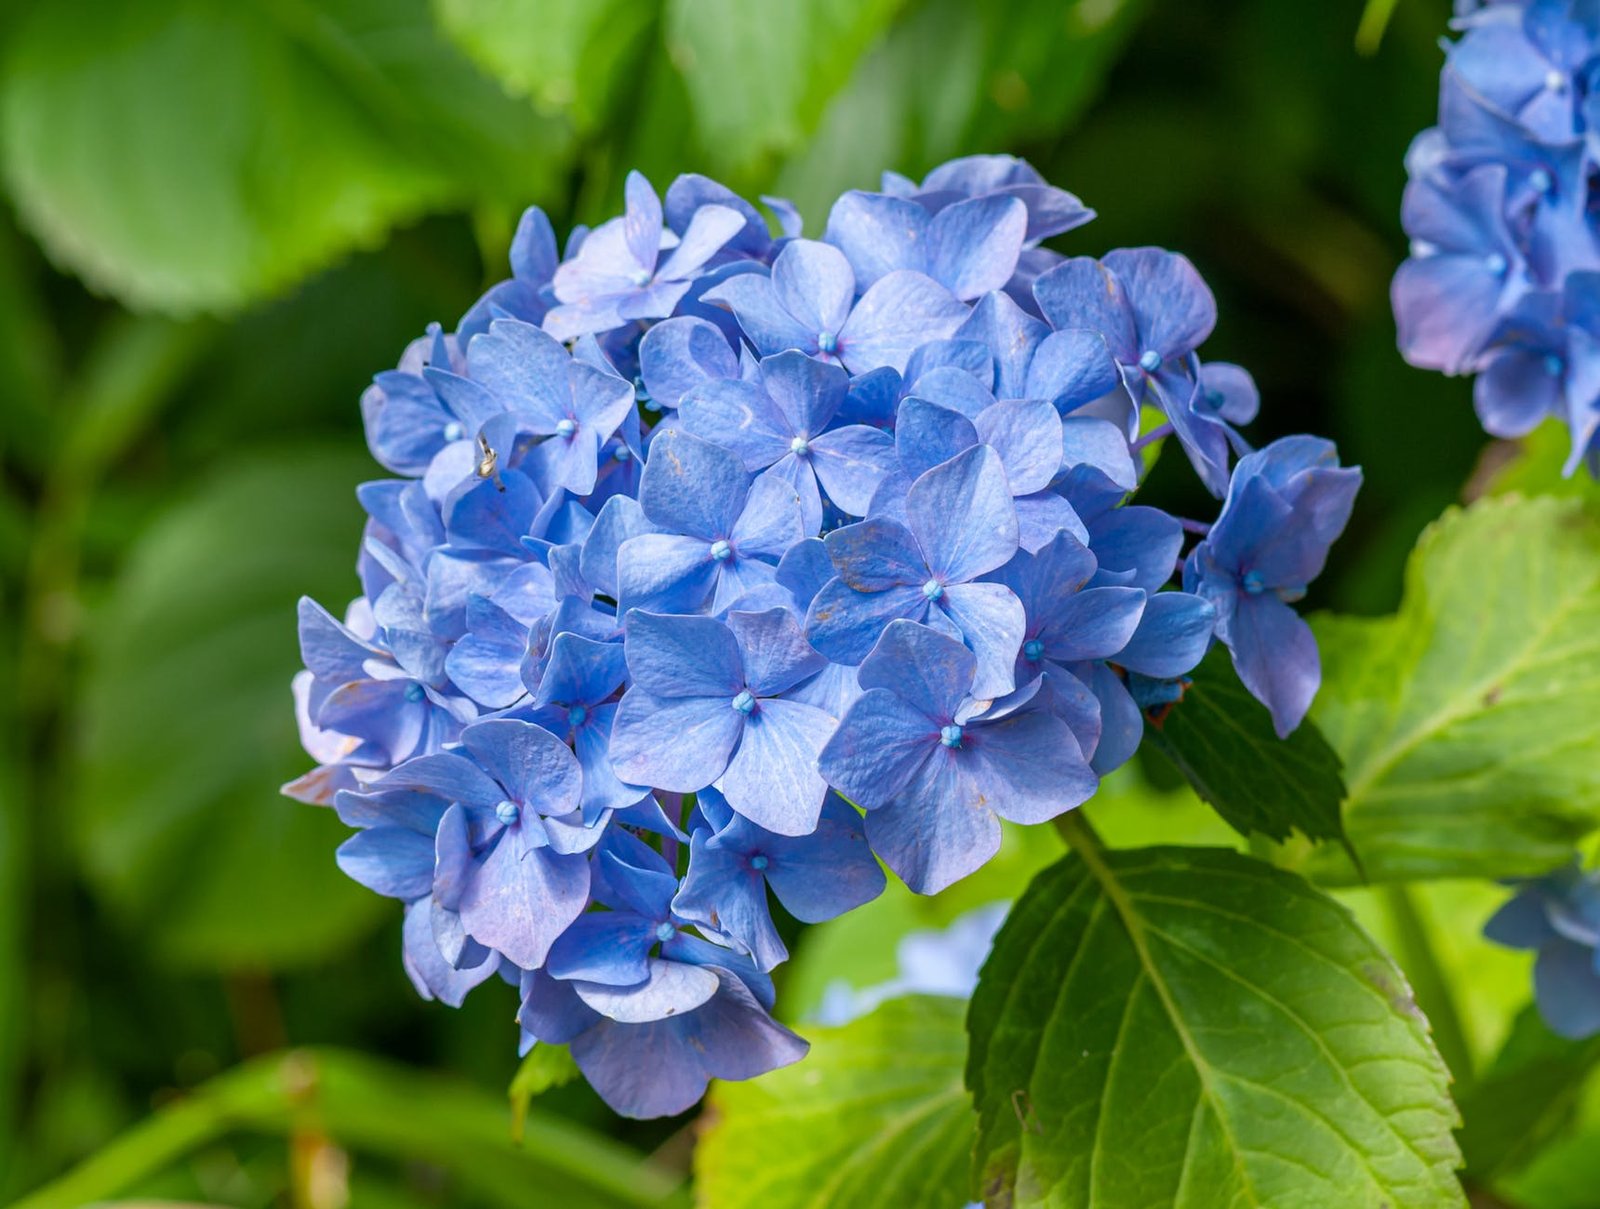 blooming blue hydrangea flower with green background in the garden is a low maintenance garden option